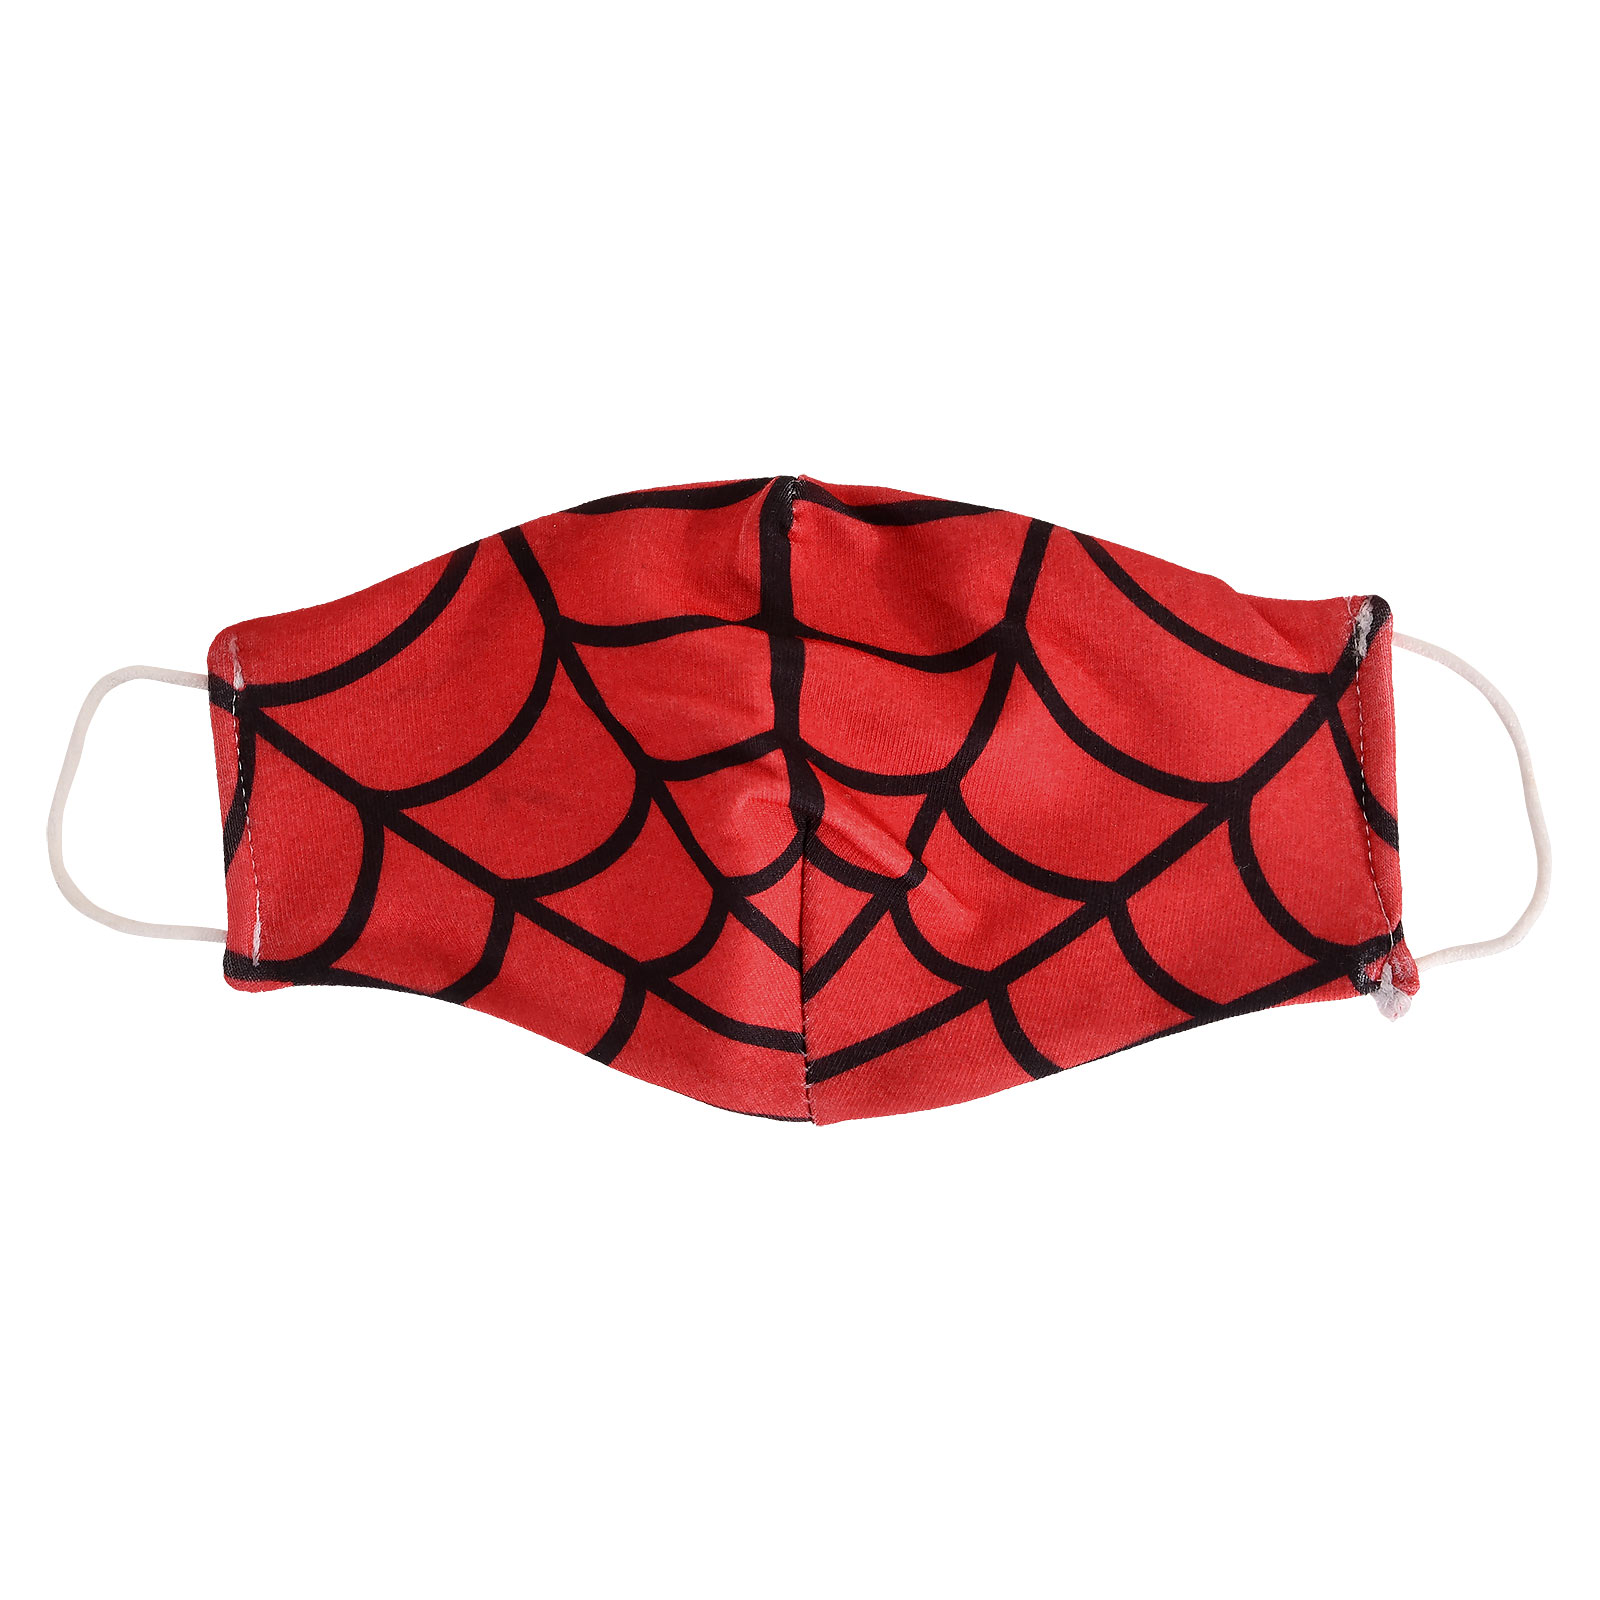 Spiderweb Face Mask for Spider-Man Fans Red